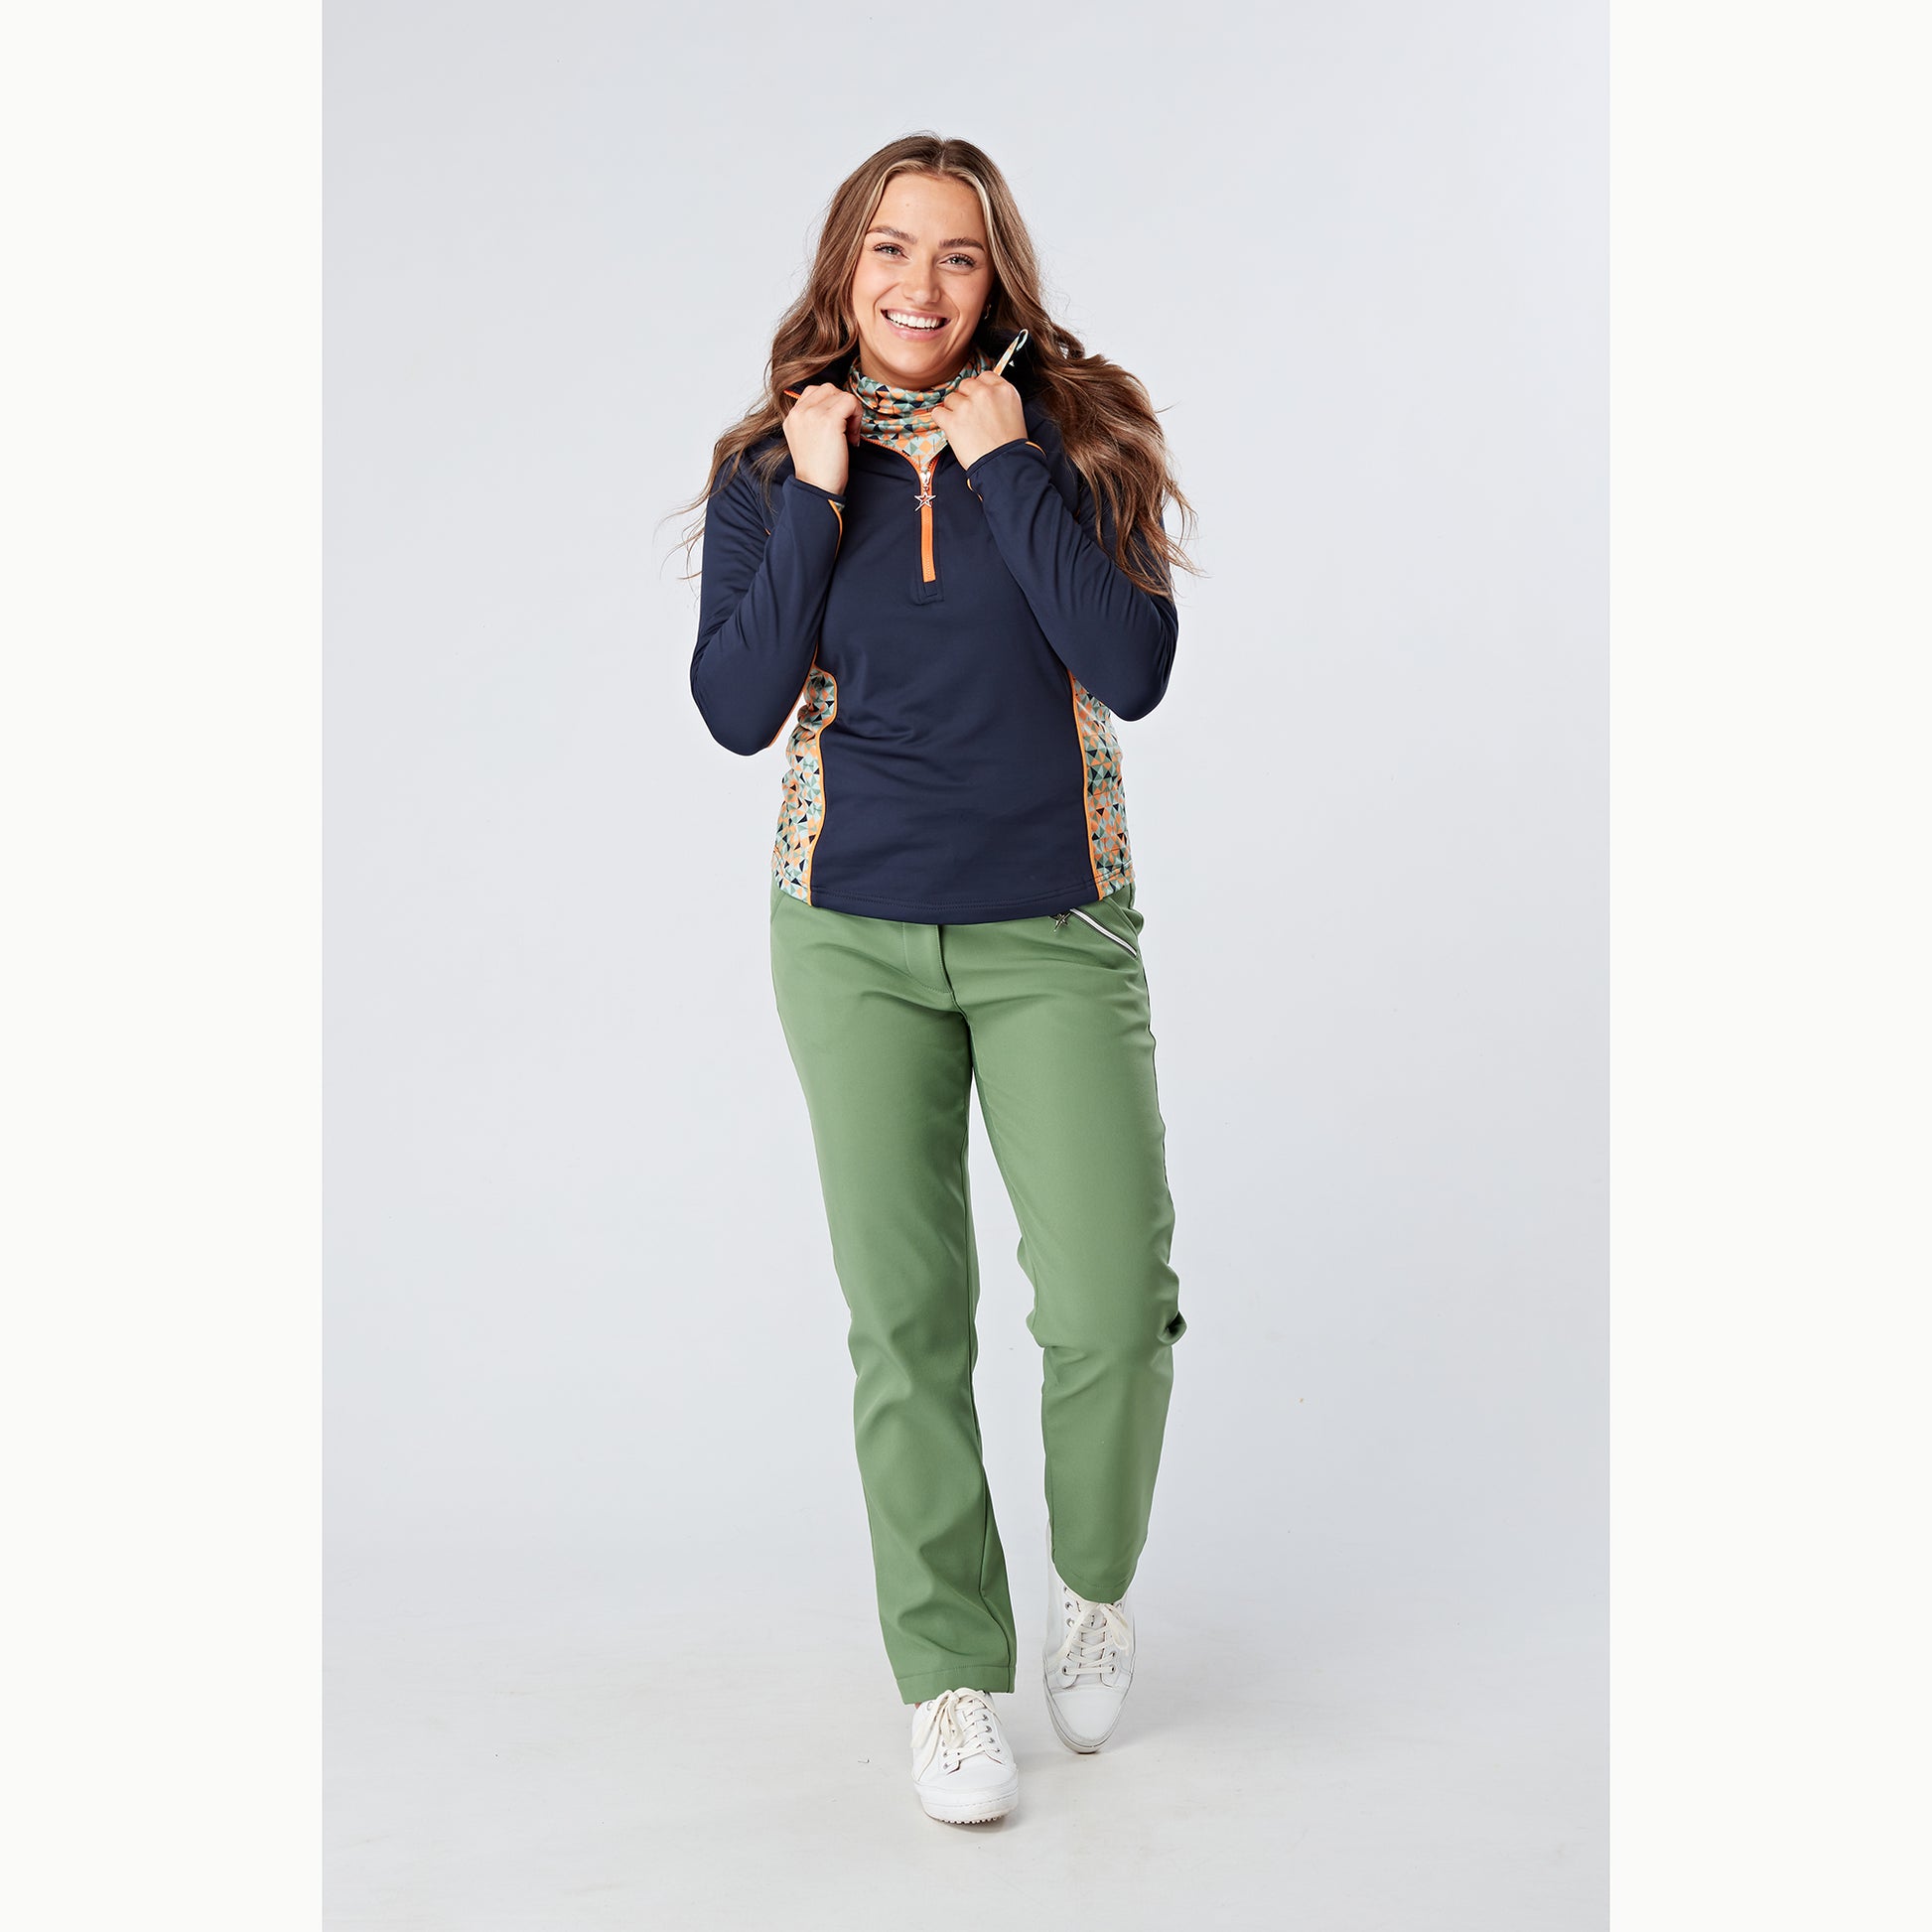 Swing Out Sister Ladies Windstopper Water Resistant Thermal Trousers in Sage